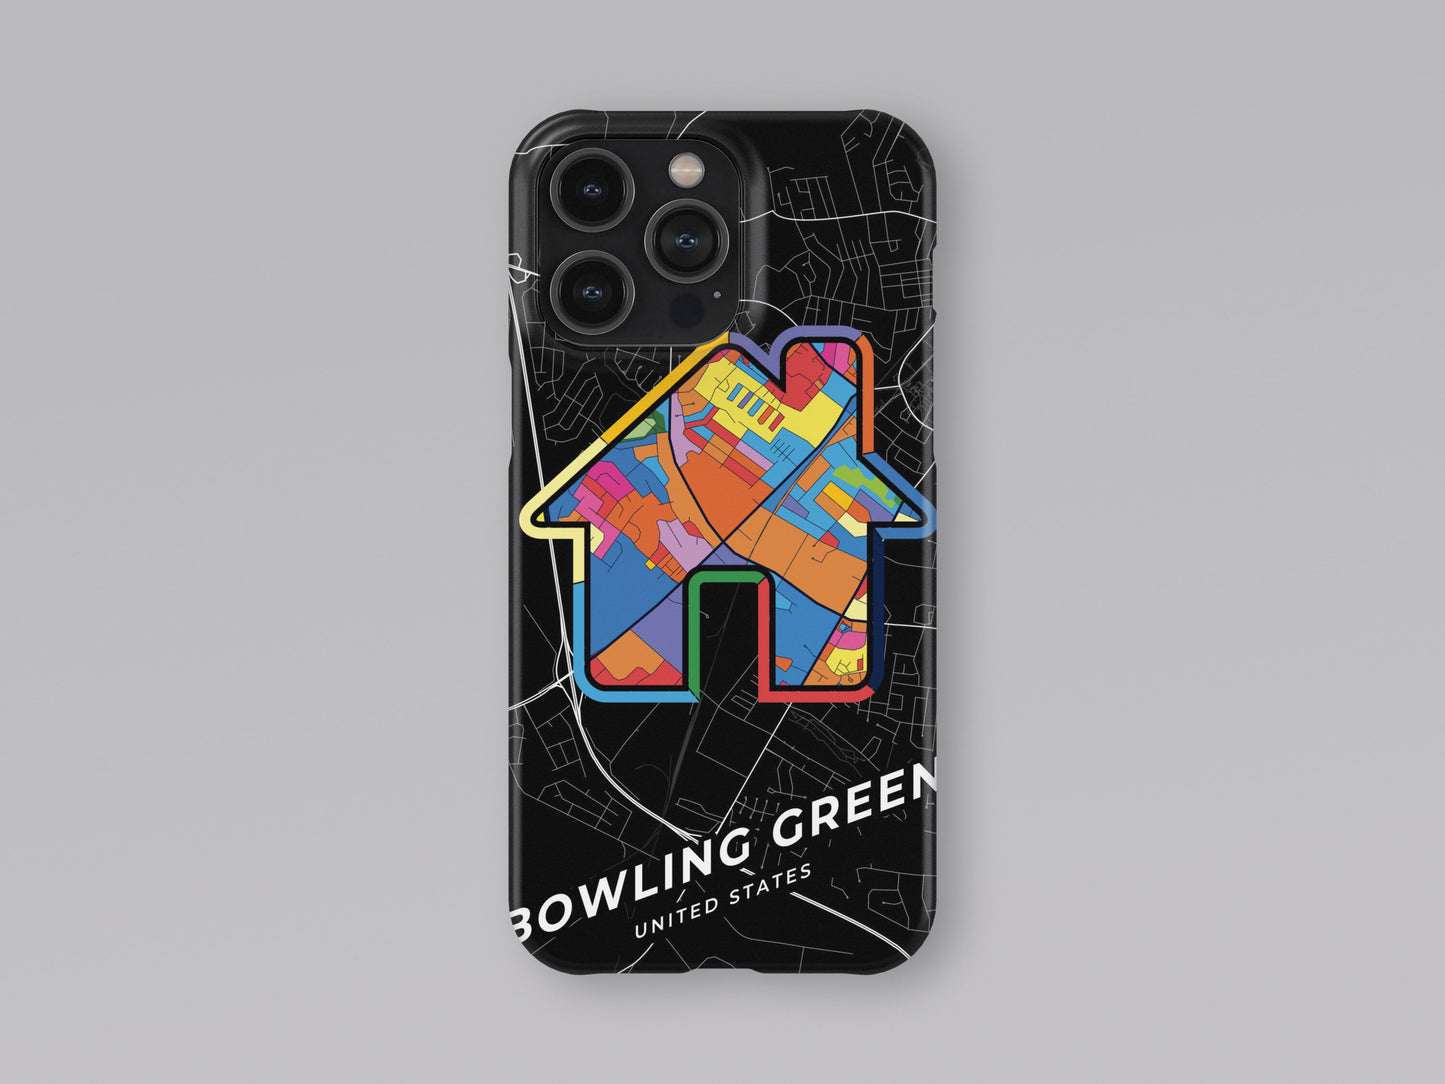 Bowling Green Kentucky slim phone case with colorful icon. Birthday, wedding or housewarming gift. Couple match cases. 3